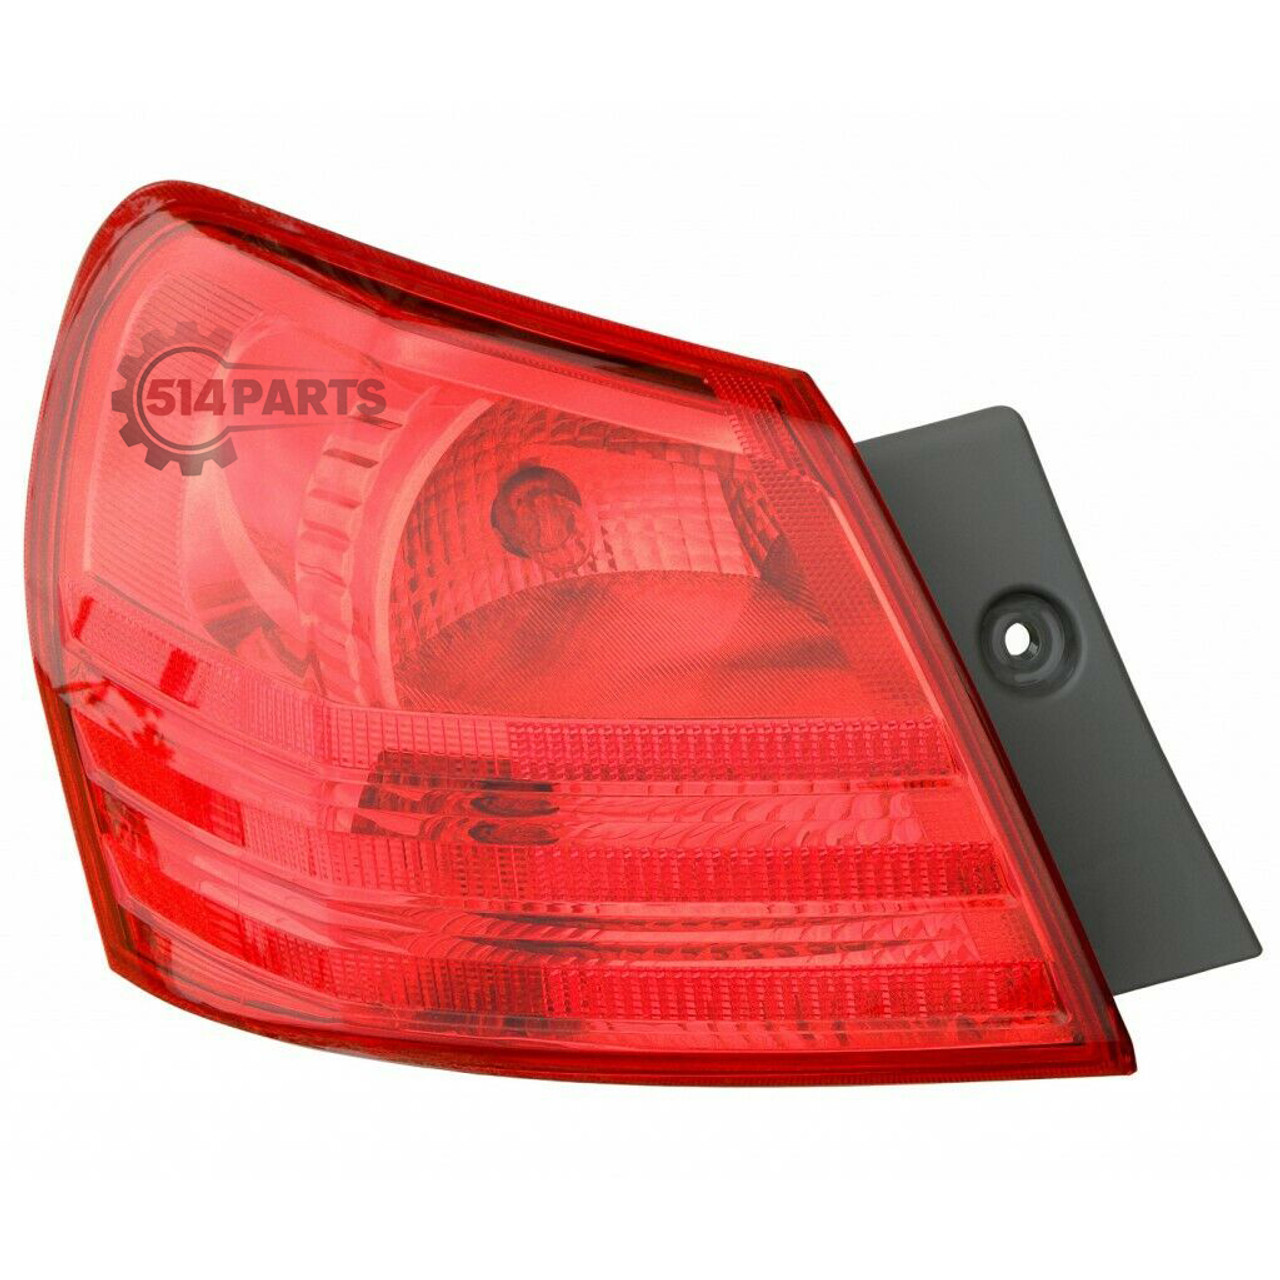 2008 - 2013 NISSAN ROGUE TAIL LIGHTS High Quality - PHARES ARRIERE Haute Qualite